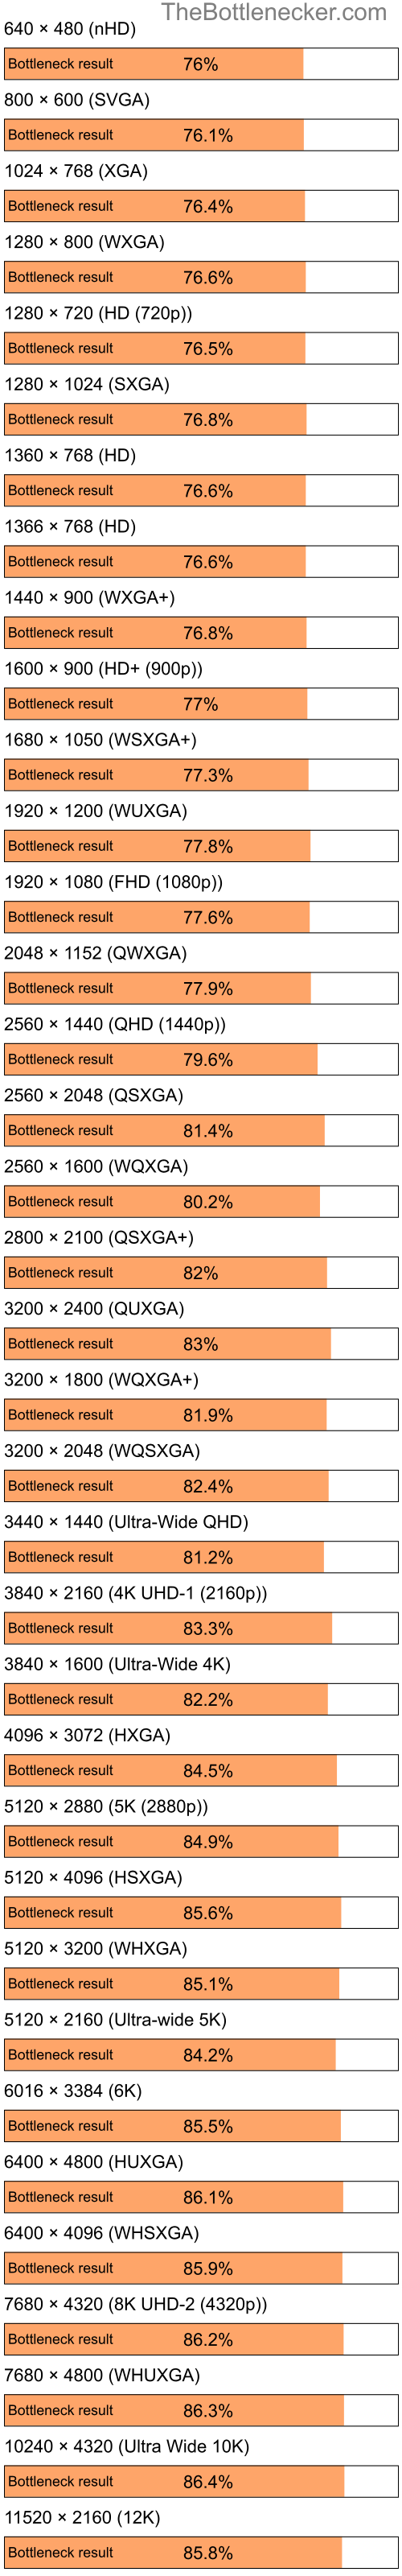 Bottleneck results by resolution for Intel Pentium 4 and AMD Mobility Radeon 9700 in General Tasks